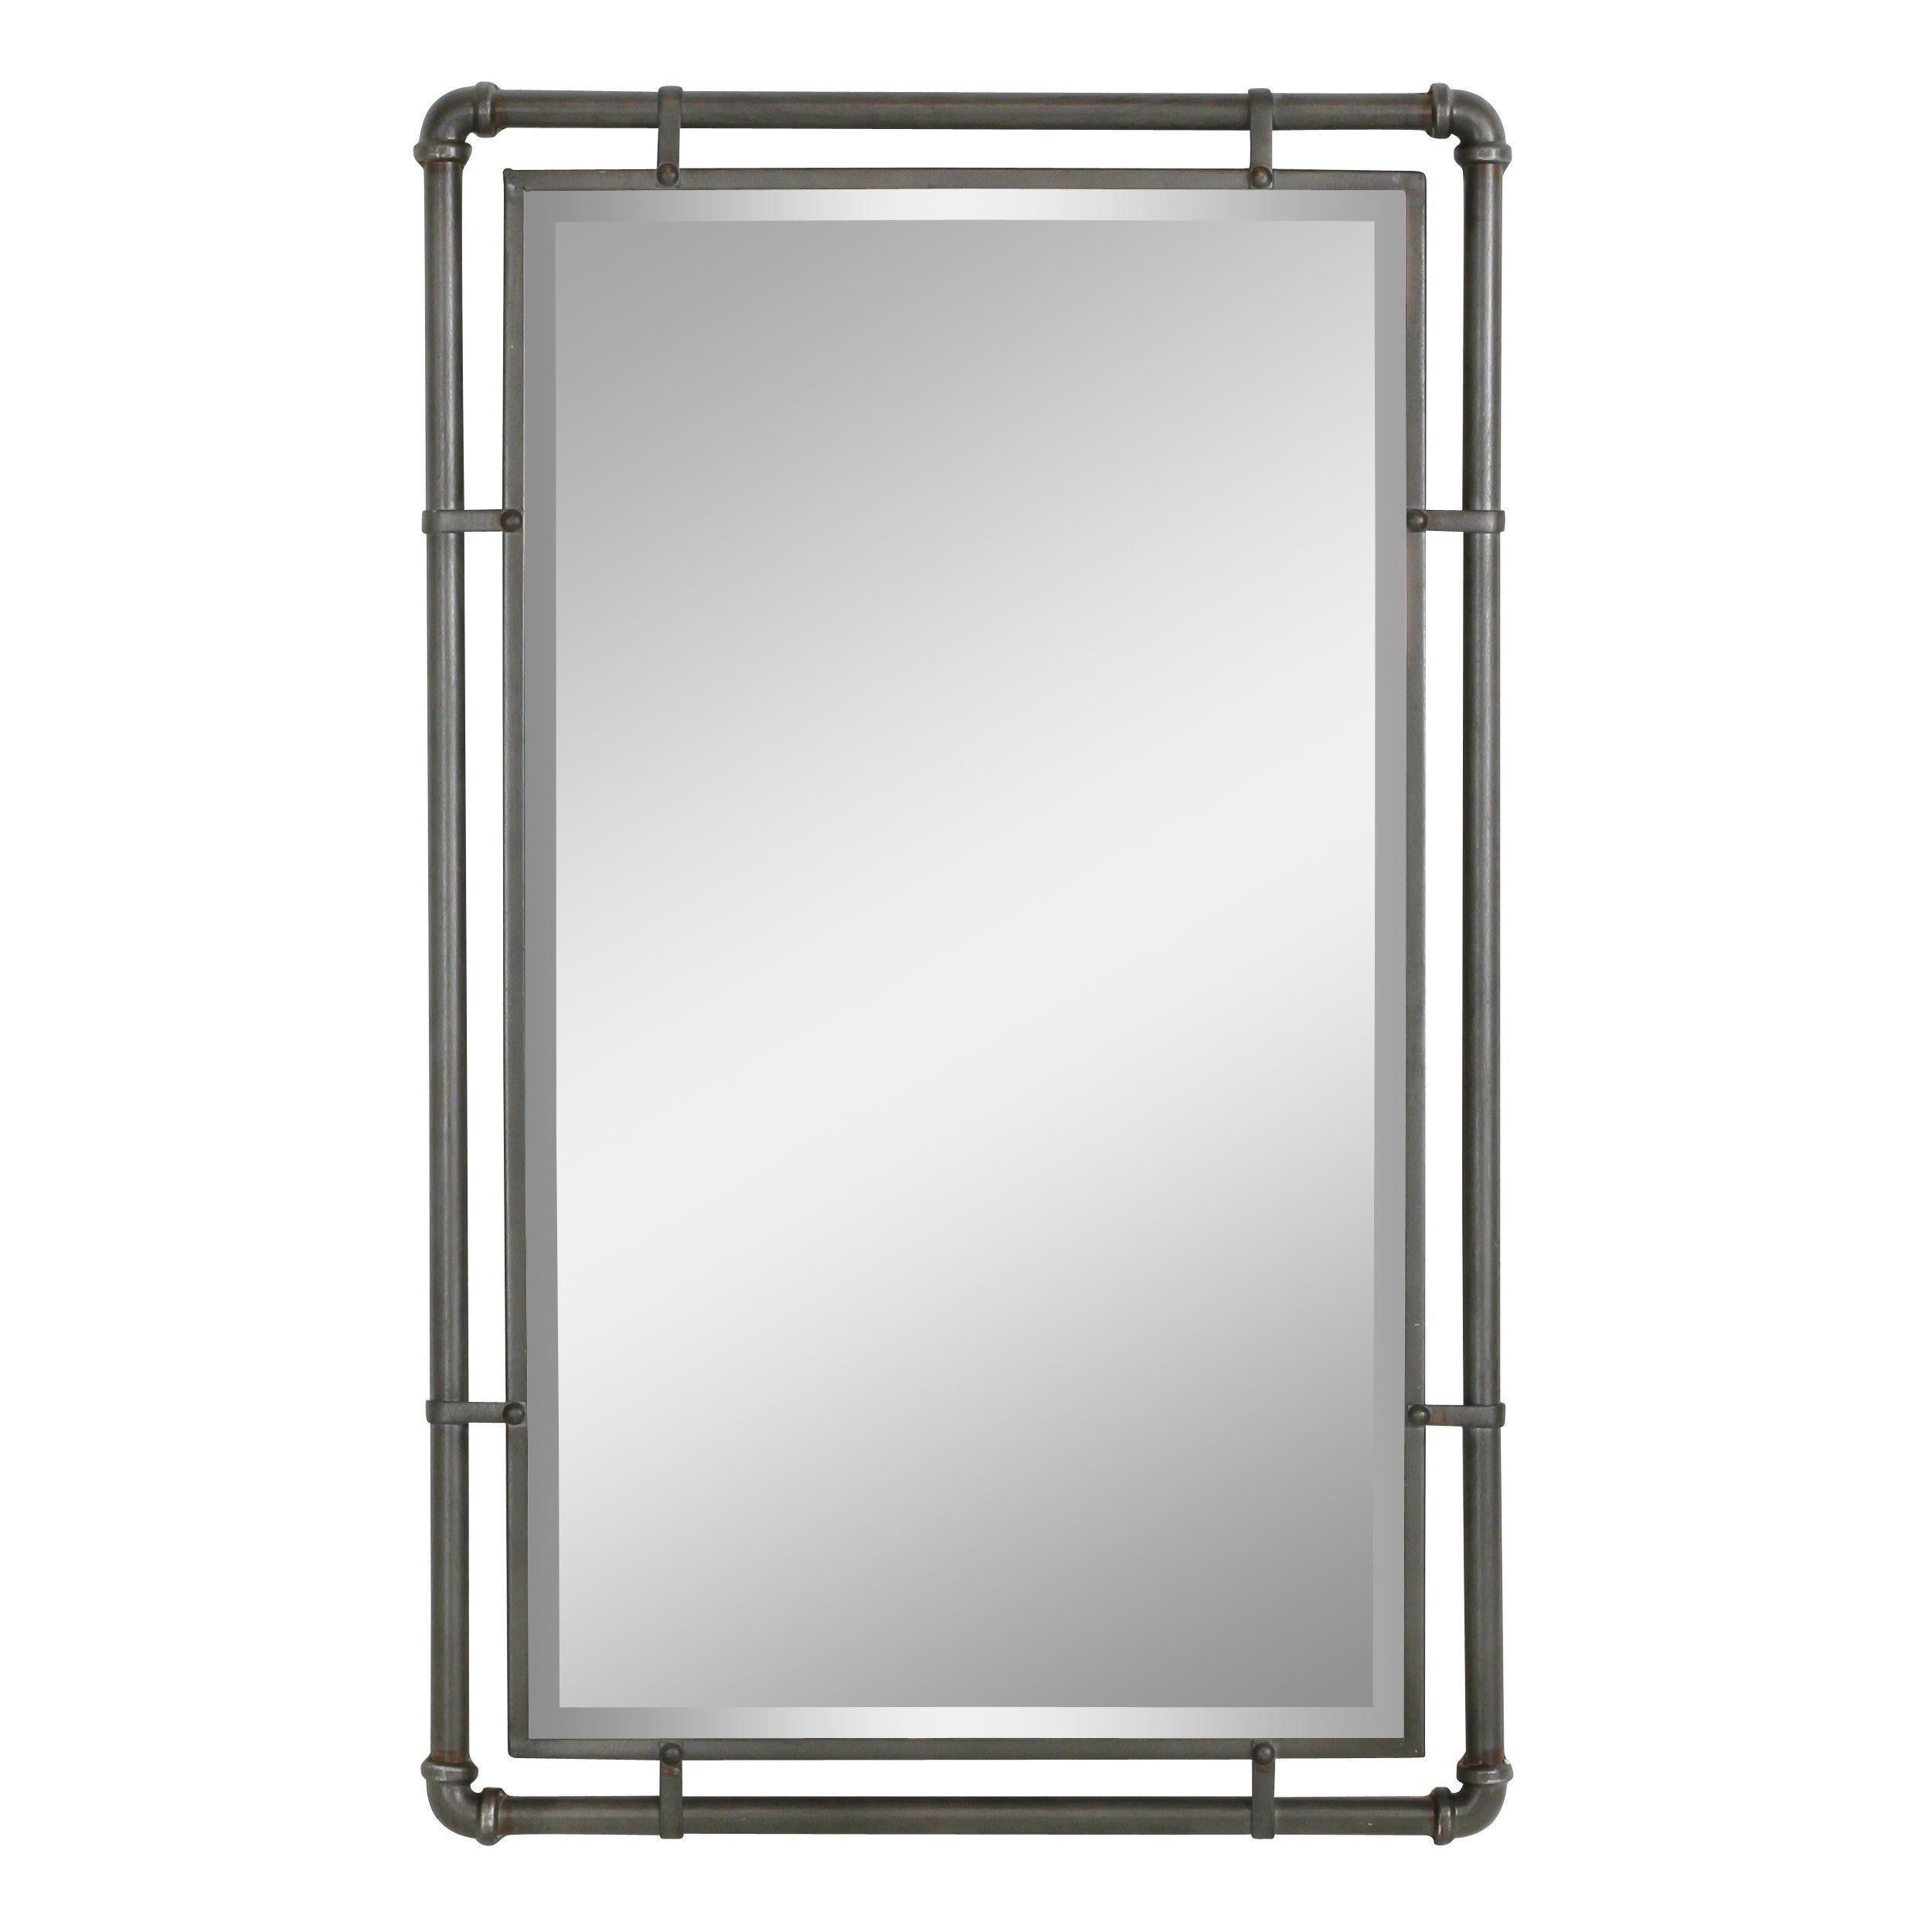 Distressed Mirrors | Shop Online At Overstock Within Alie Traditional Beveled Distressed Accent Mirrors (View 26 of 30)